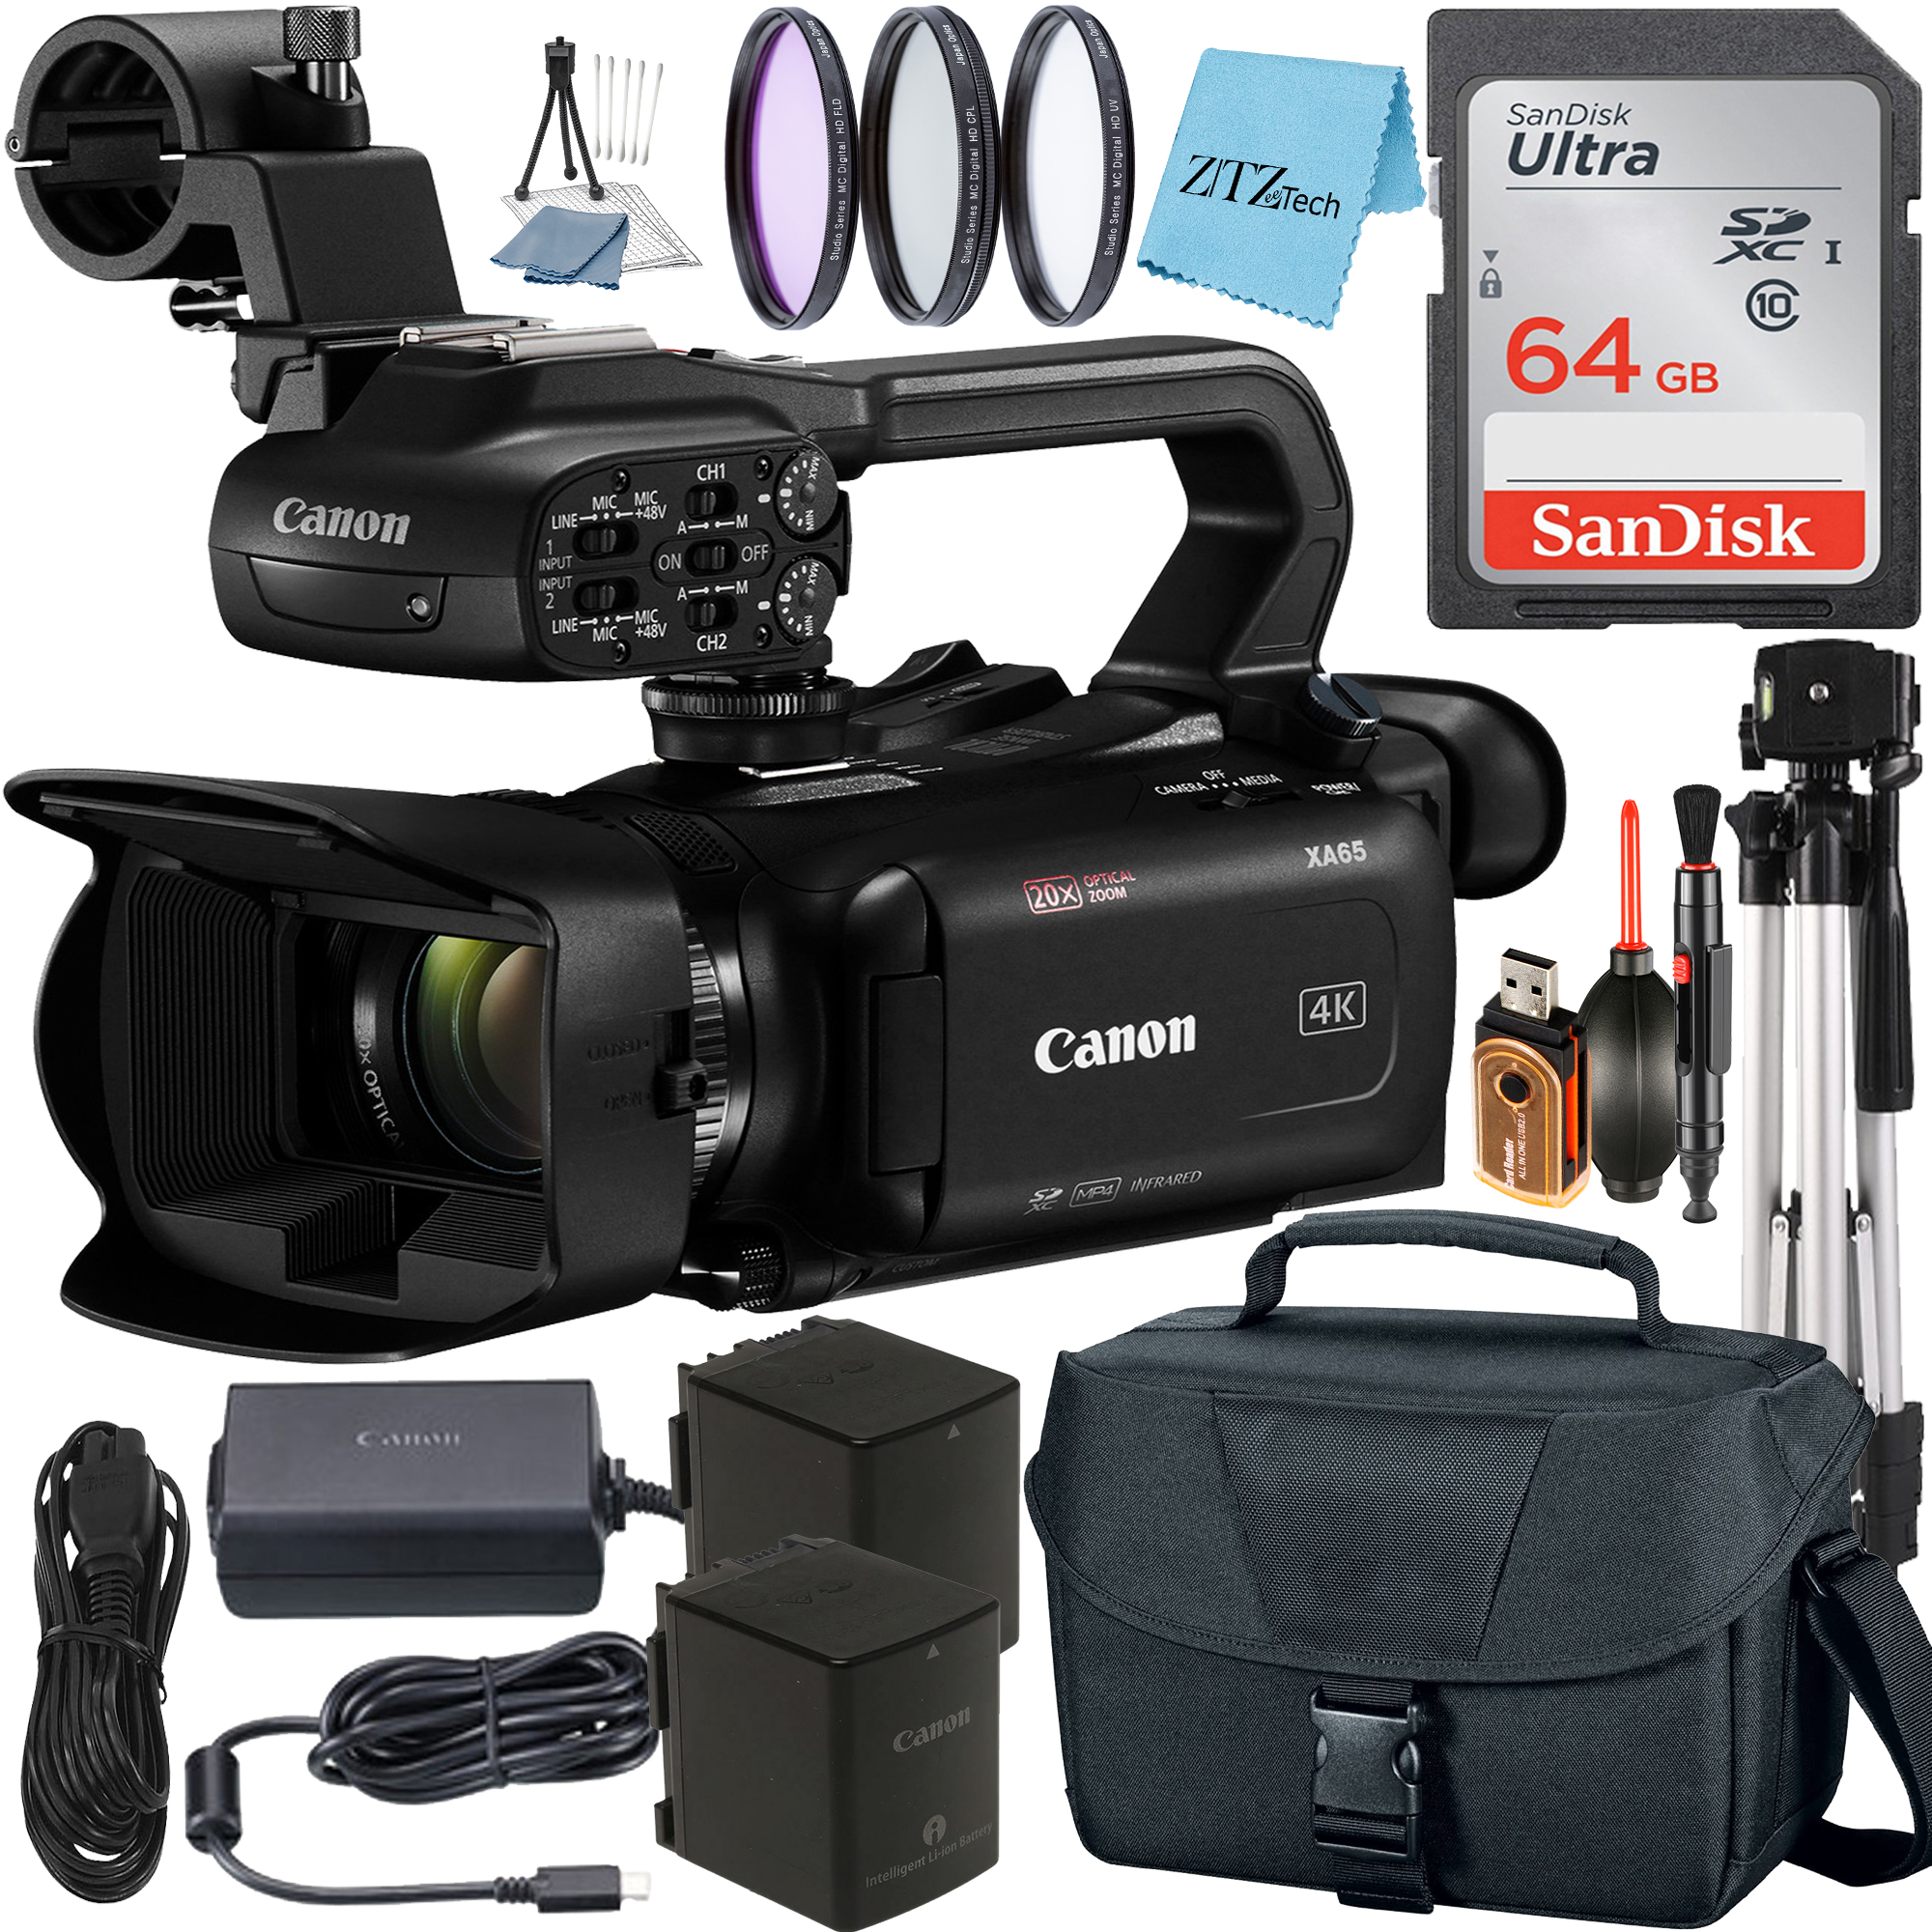 Canon XA65 Professional UHD 4K Camcorder with SanDisk 64GB Memory Card + Case + Tripod + 3 Pieces Filter + ZeeTech Accessory Bundle